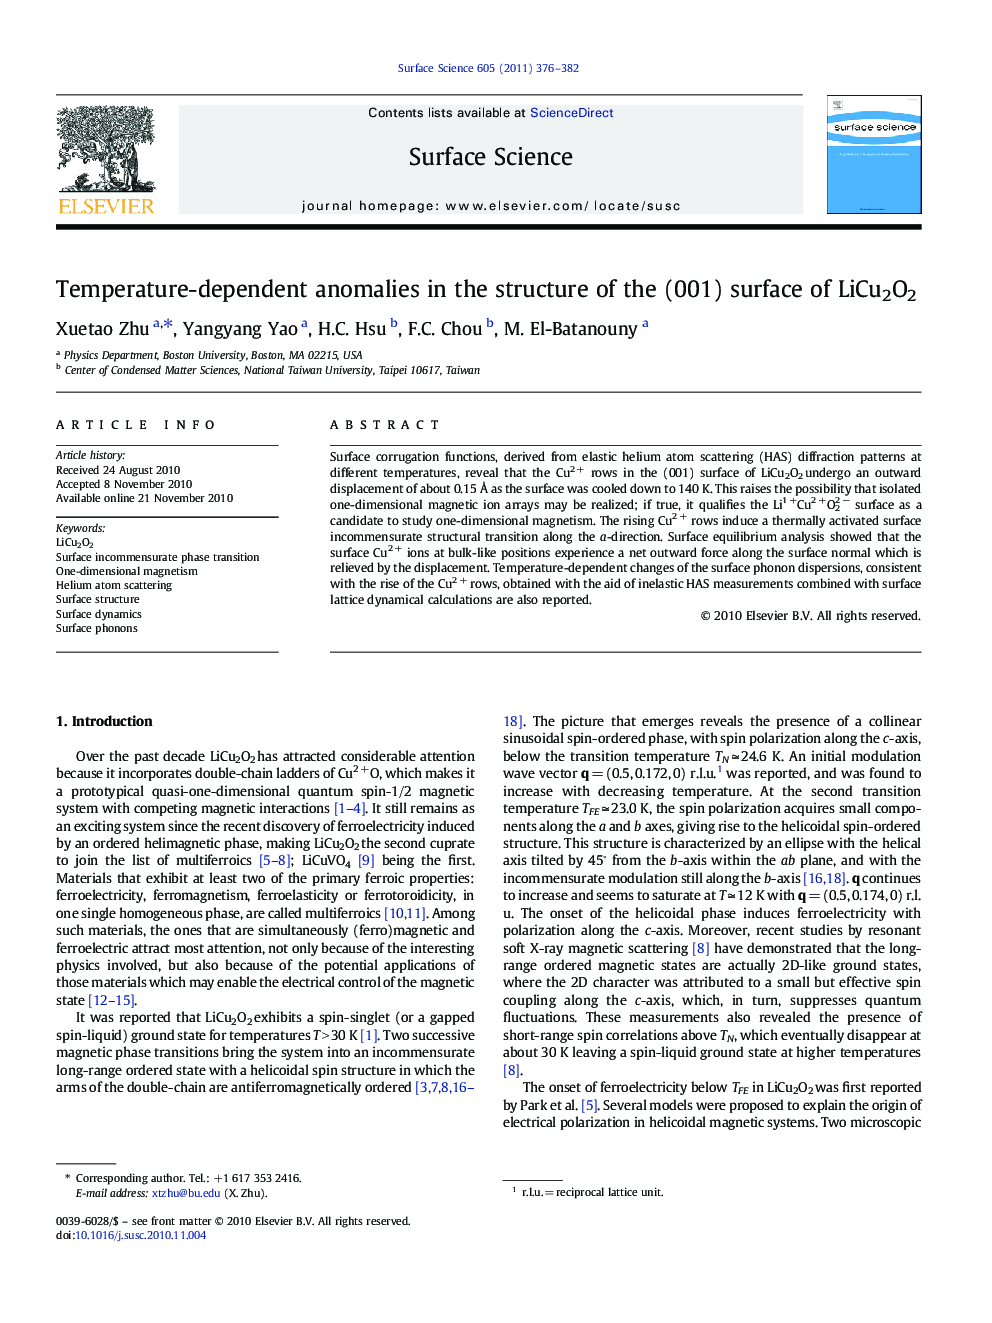 Temperature-dependent anomalies in the structure of the (001) surface of LiCu2O2